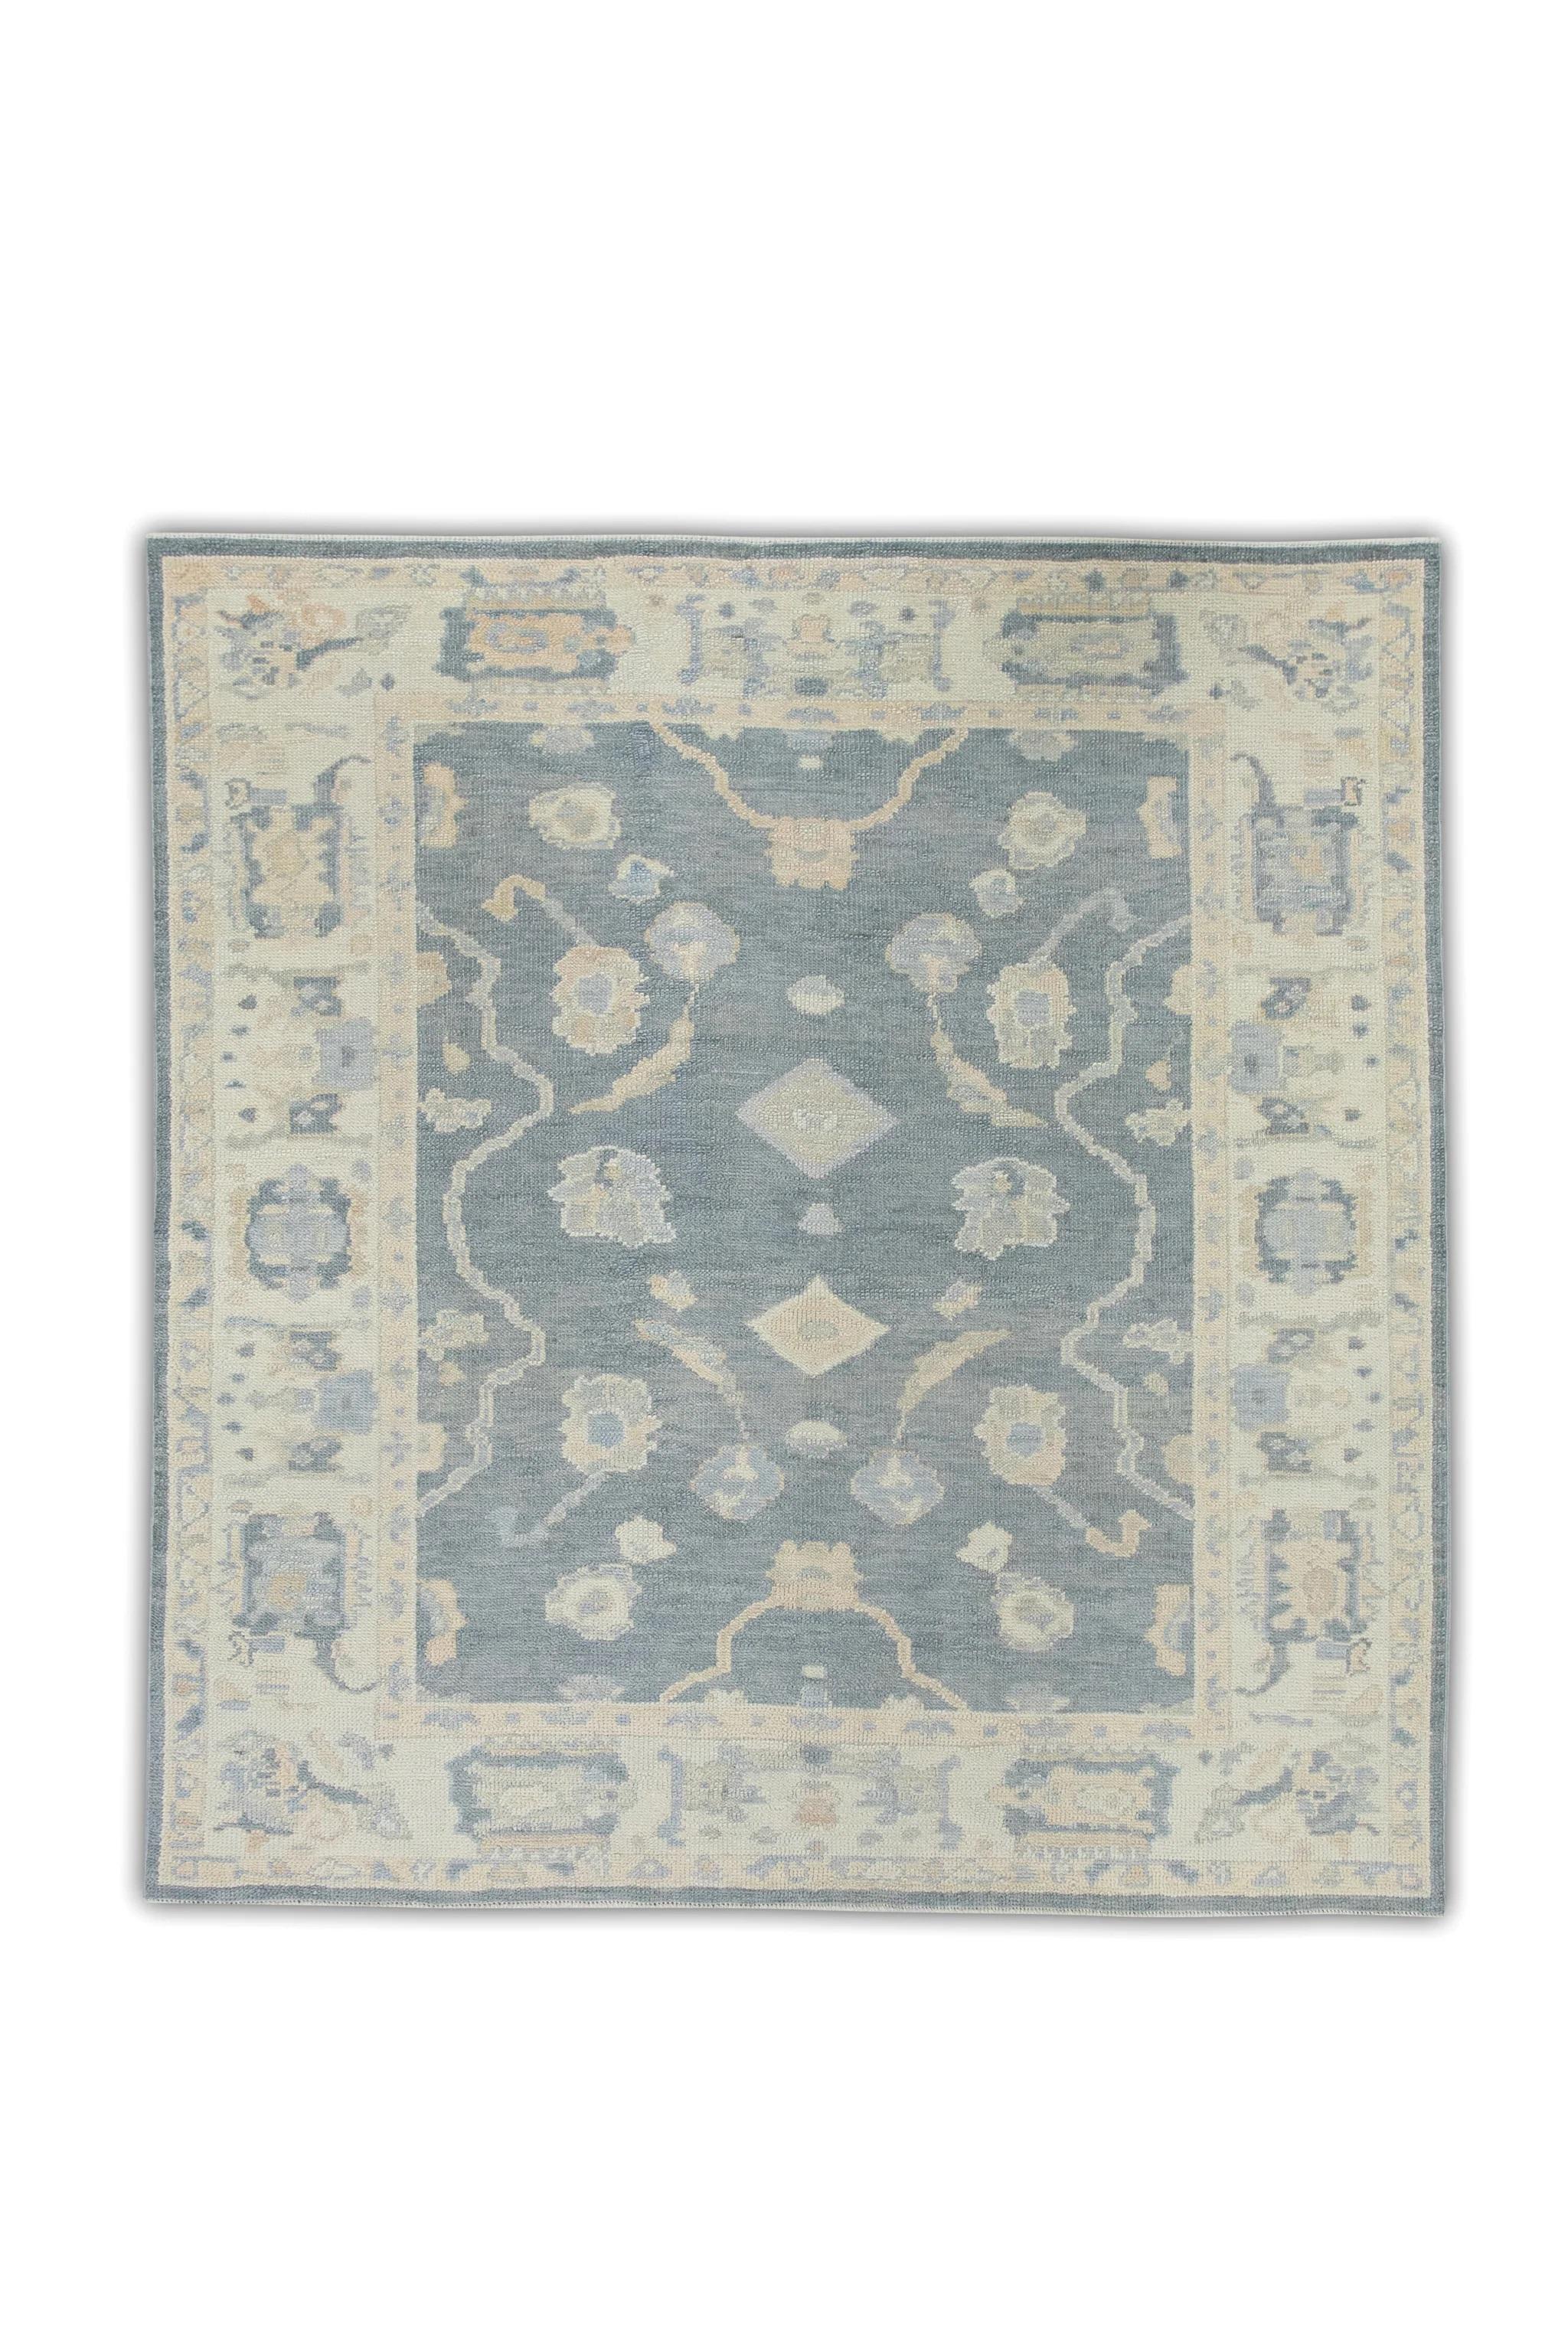 Contemporary Gray Multicolor Handwoven Wool Floral Turkish Oushak Rug 5'7